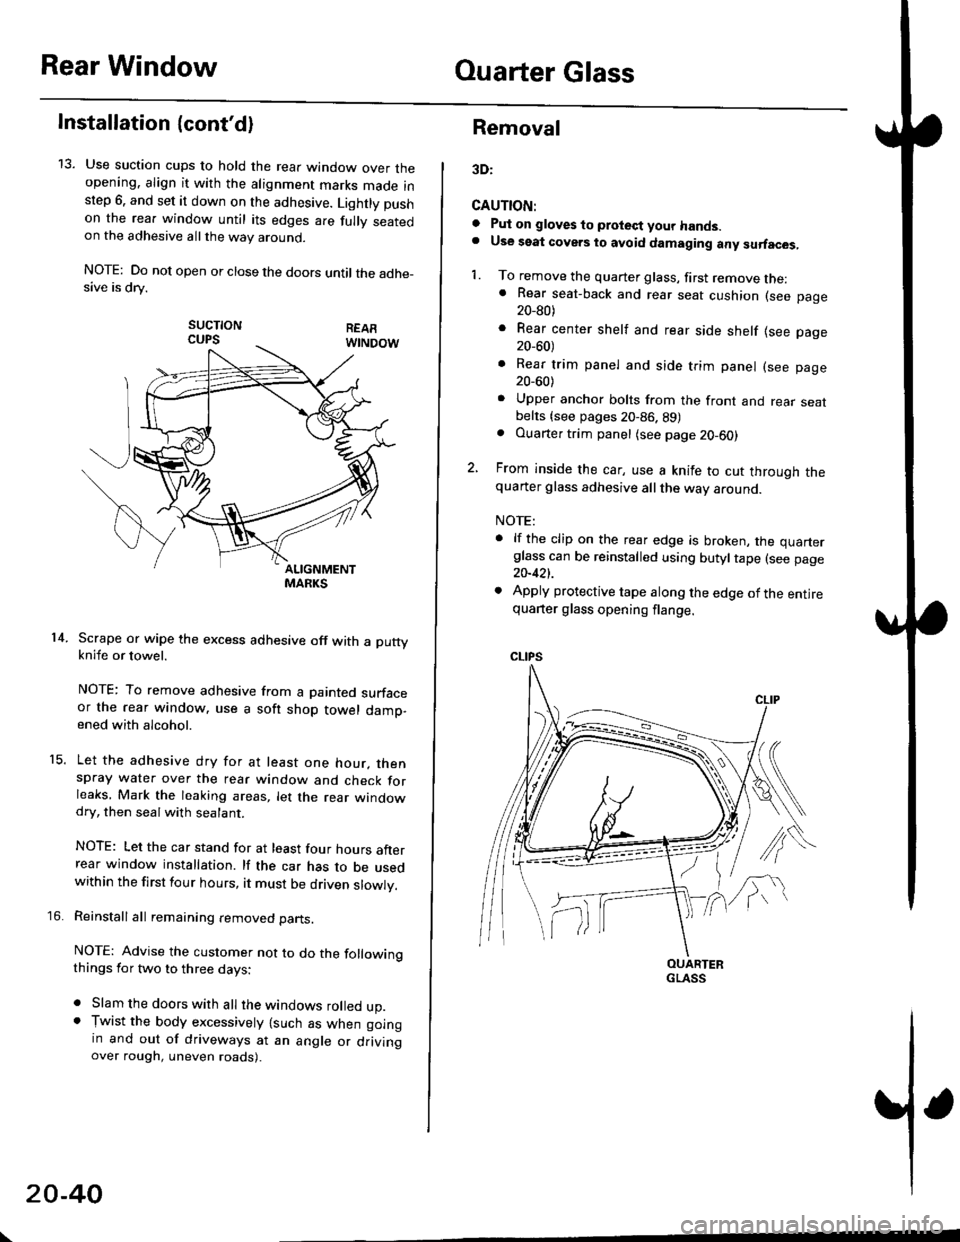 HONDA CIVIC 1999 6.G Workshop Manual Rear WindowOuarter Glass
Installation {contd)
13. Use suction cups to hold the rear window over theopening. align it with the alignment marks made inslep 6. and set it down on the adhesive. Lightly p